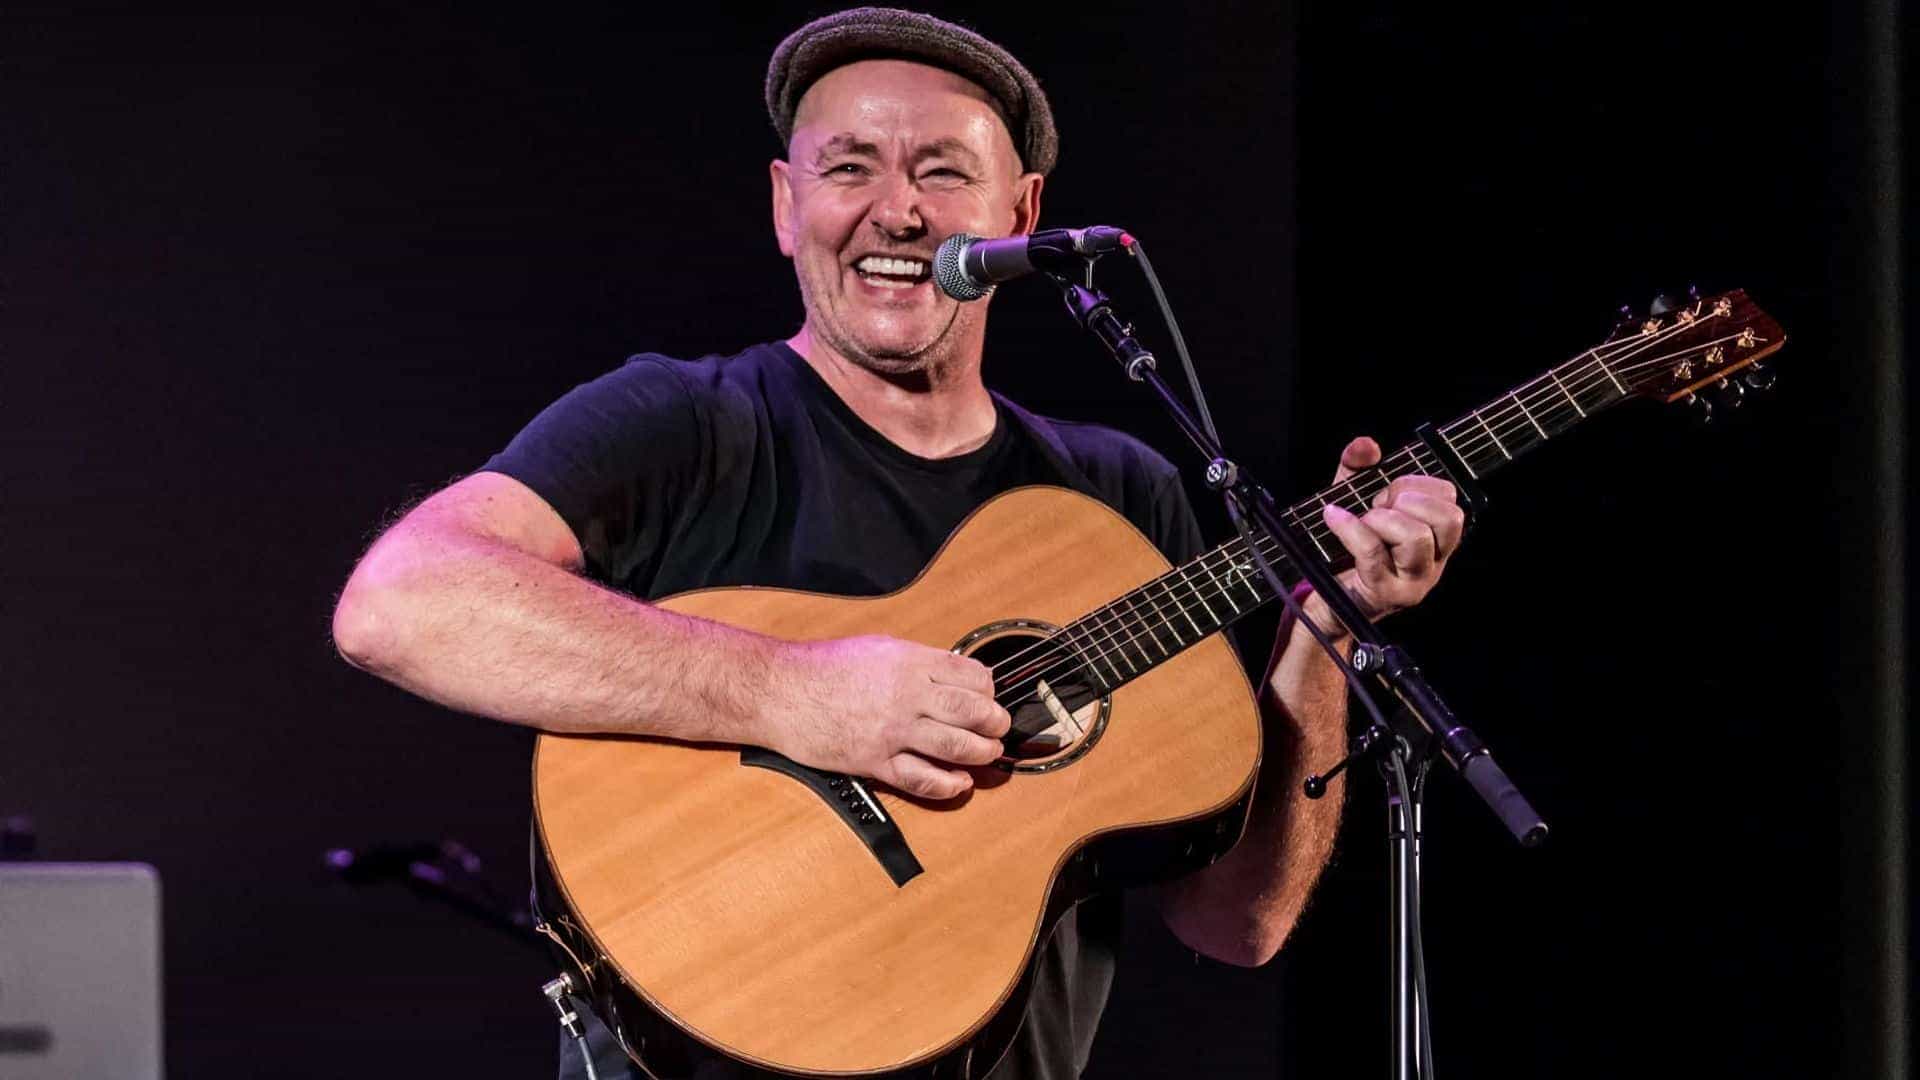 Francis Dunnery's It Bites